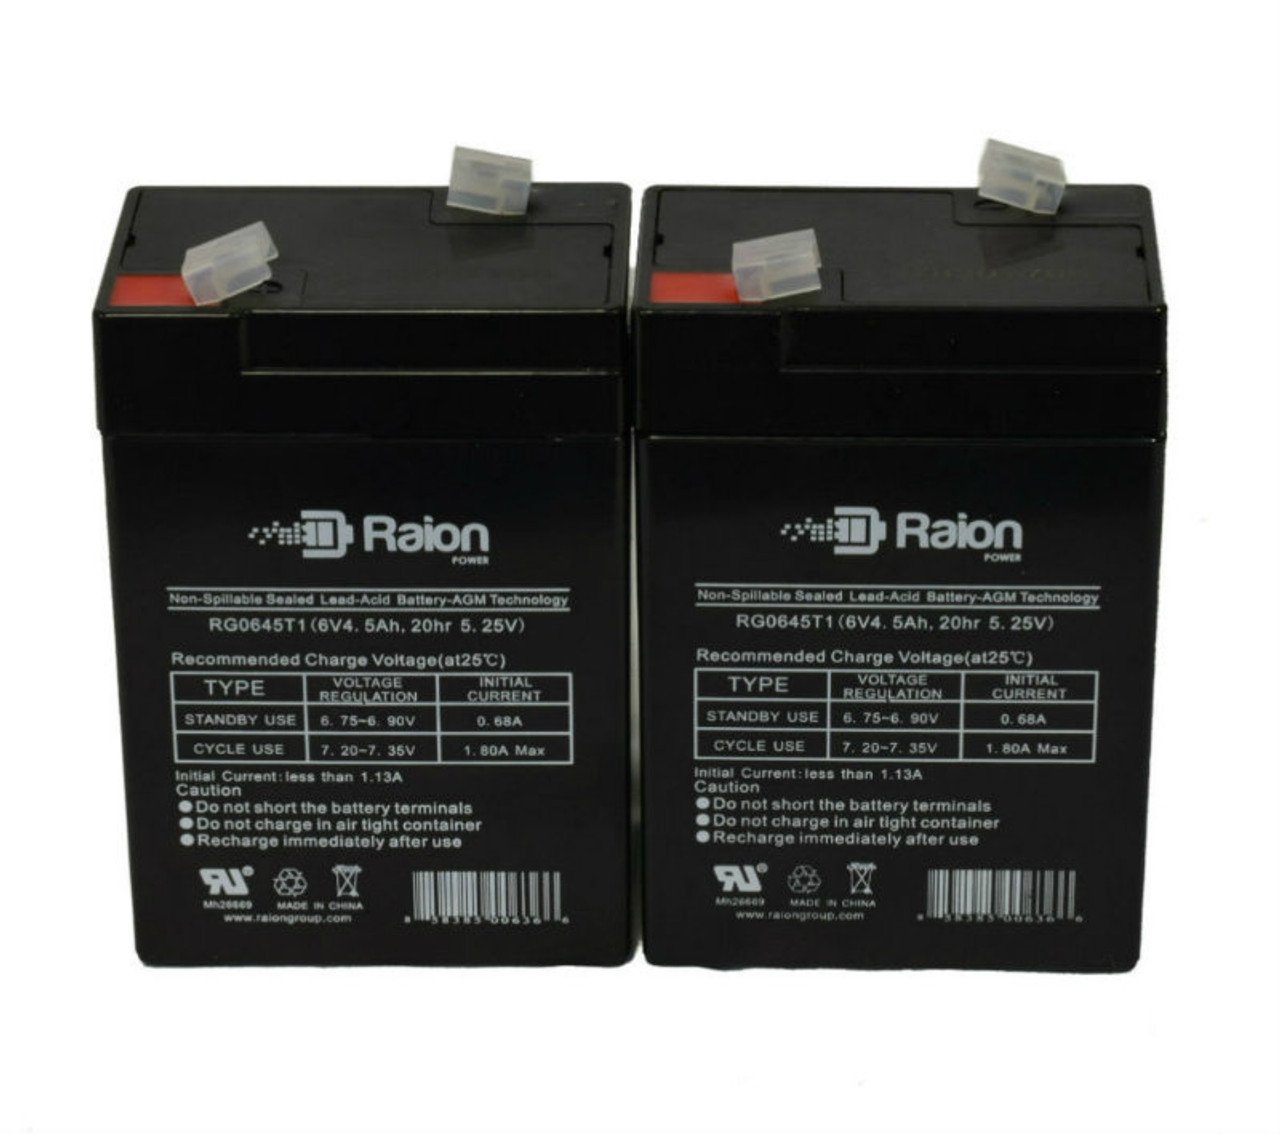 Raion Power 6 Volt 4.5Ah RG0645T1 Replacement Battery for Genesis NP4-6W - 2 Pack